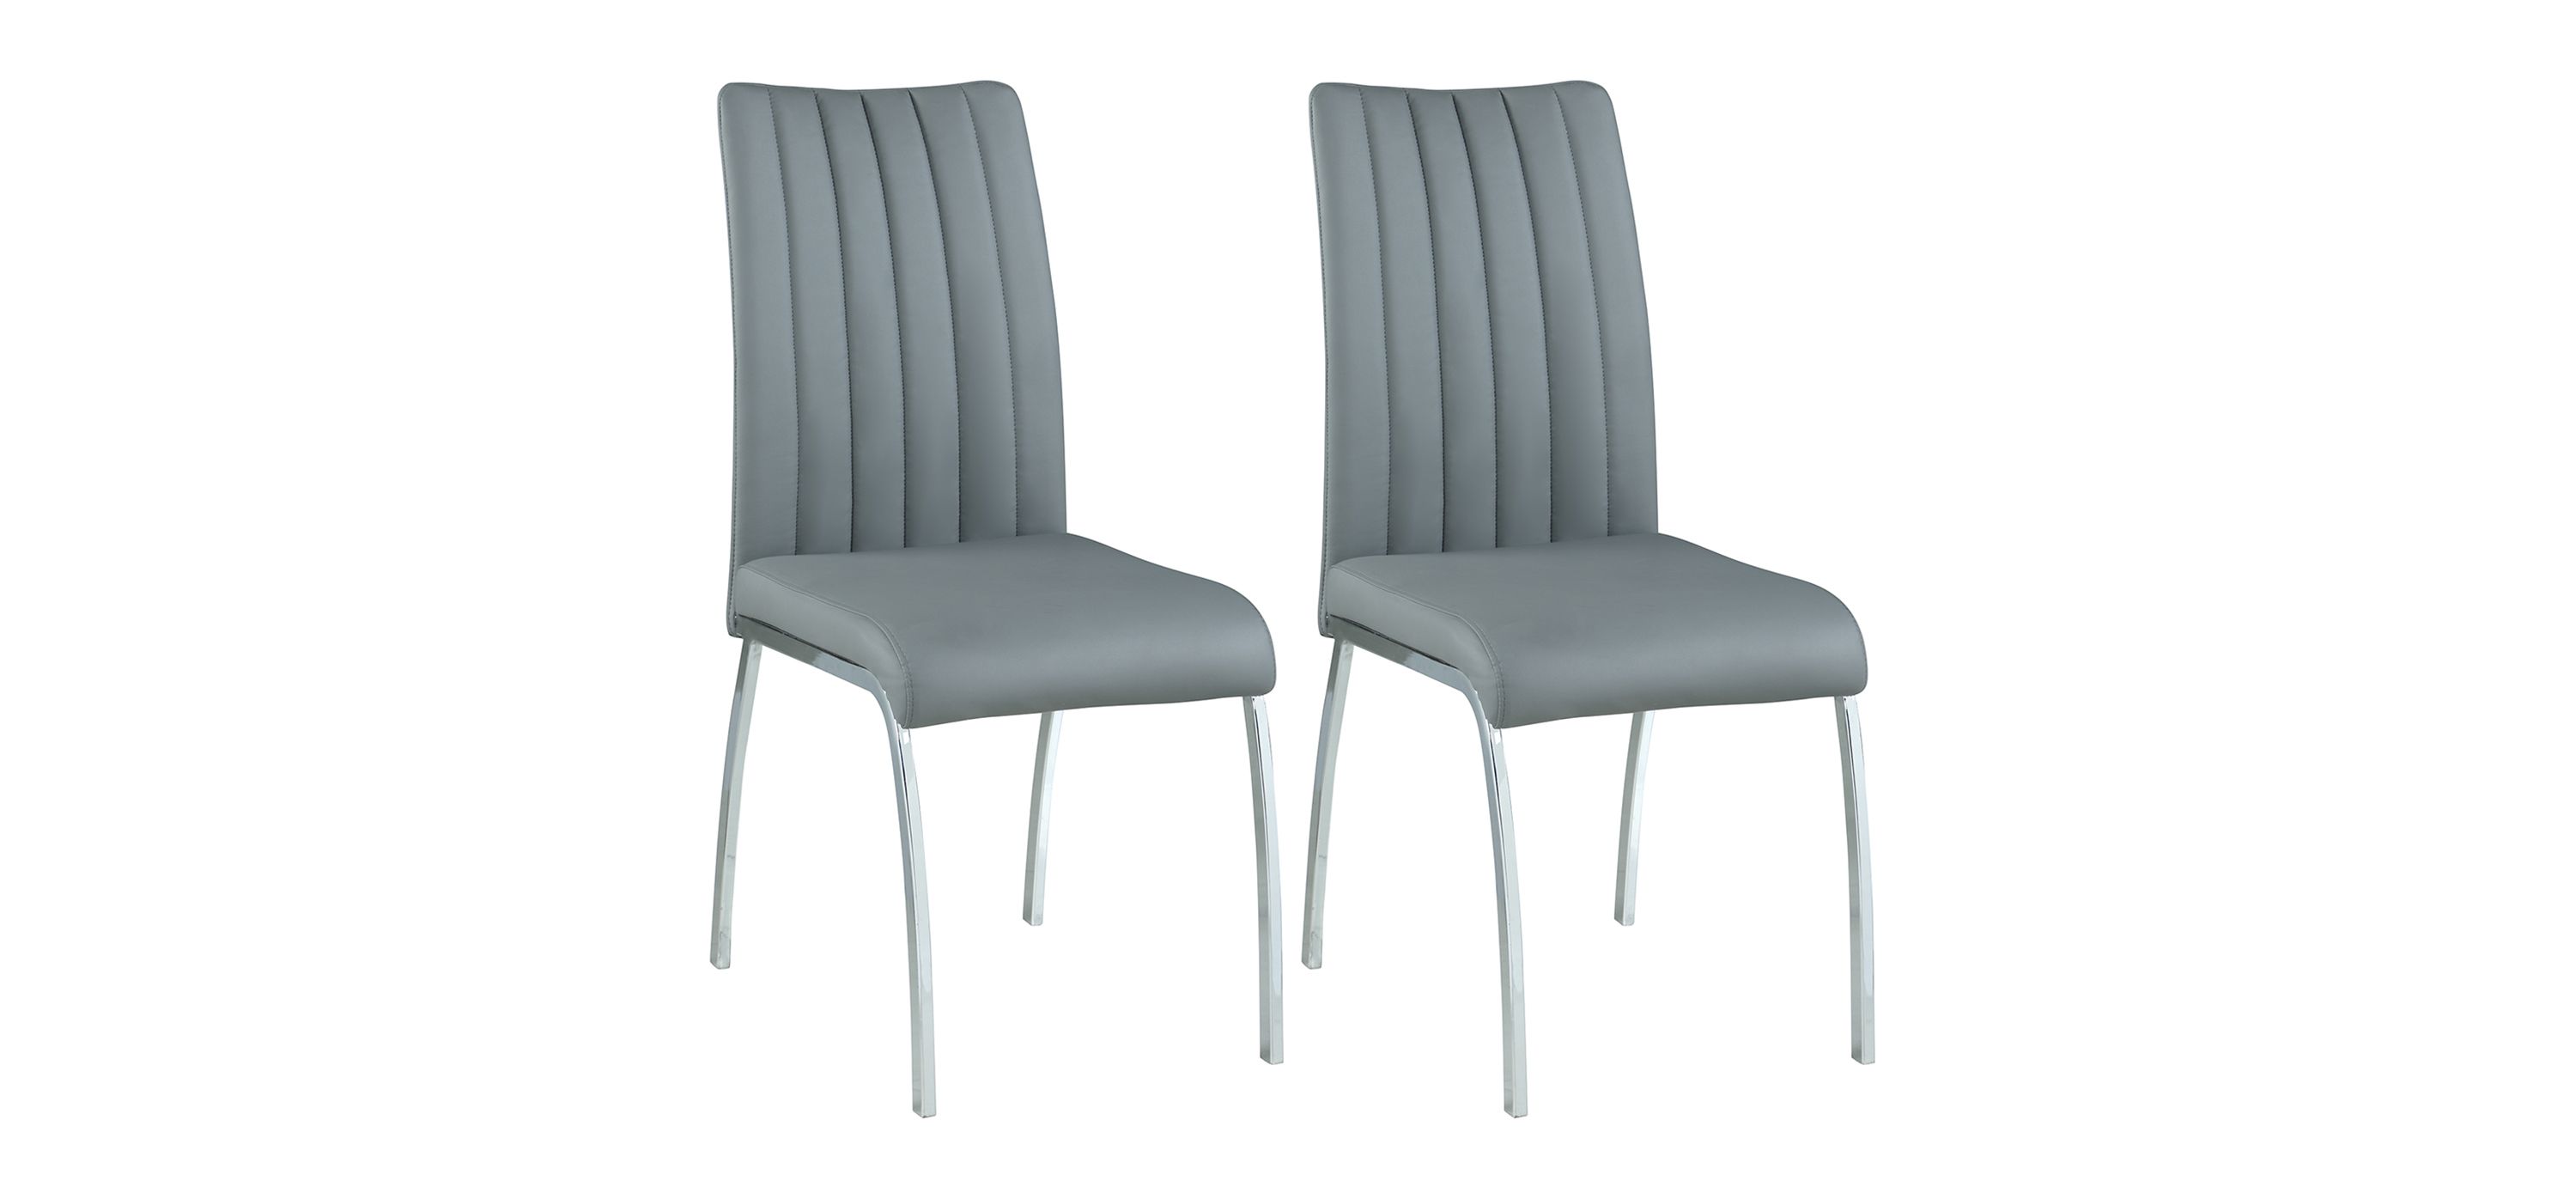 Vanessia Dining Chair - Set of 2